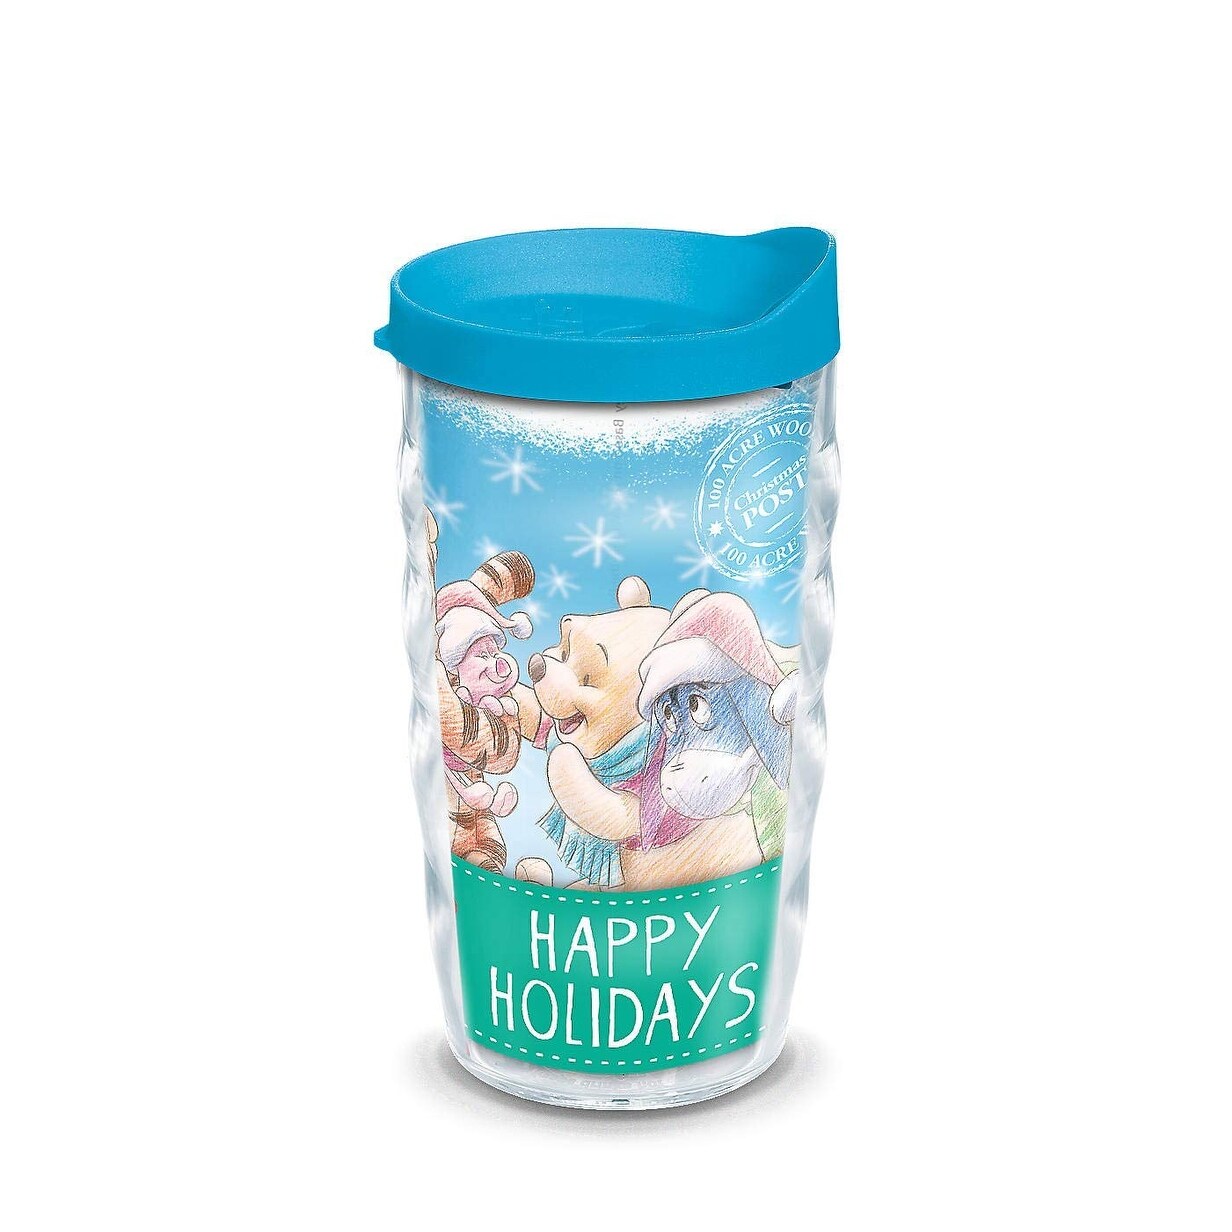 https://ak1.ostkcdn.com/images/products/is/images/direct/e6e7c6a851f76a5f03afe158783c41ab243e9afc/Disney-Winnie-The-Pooh-Christmas-10-oz-Wavy-Tumbler-with-lid.jpg